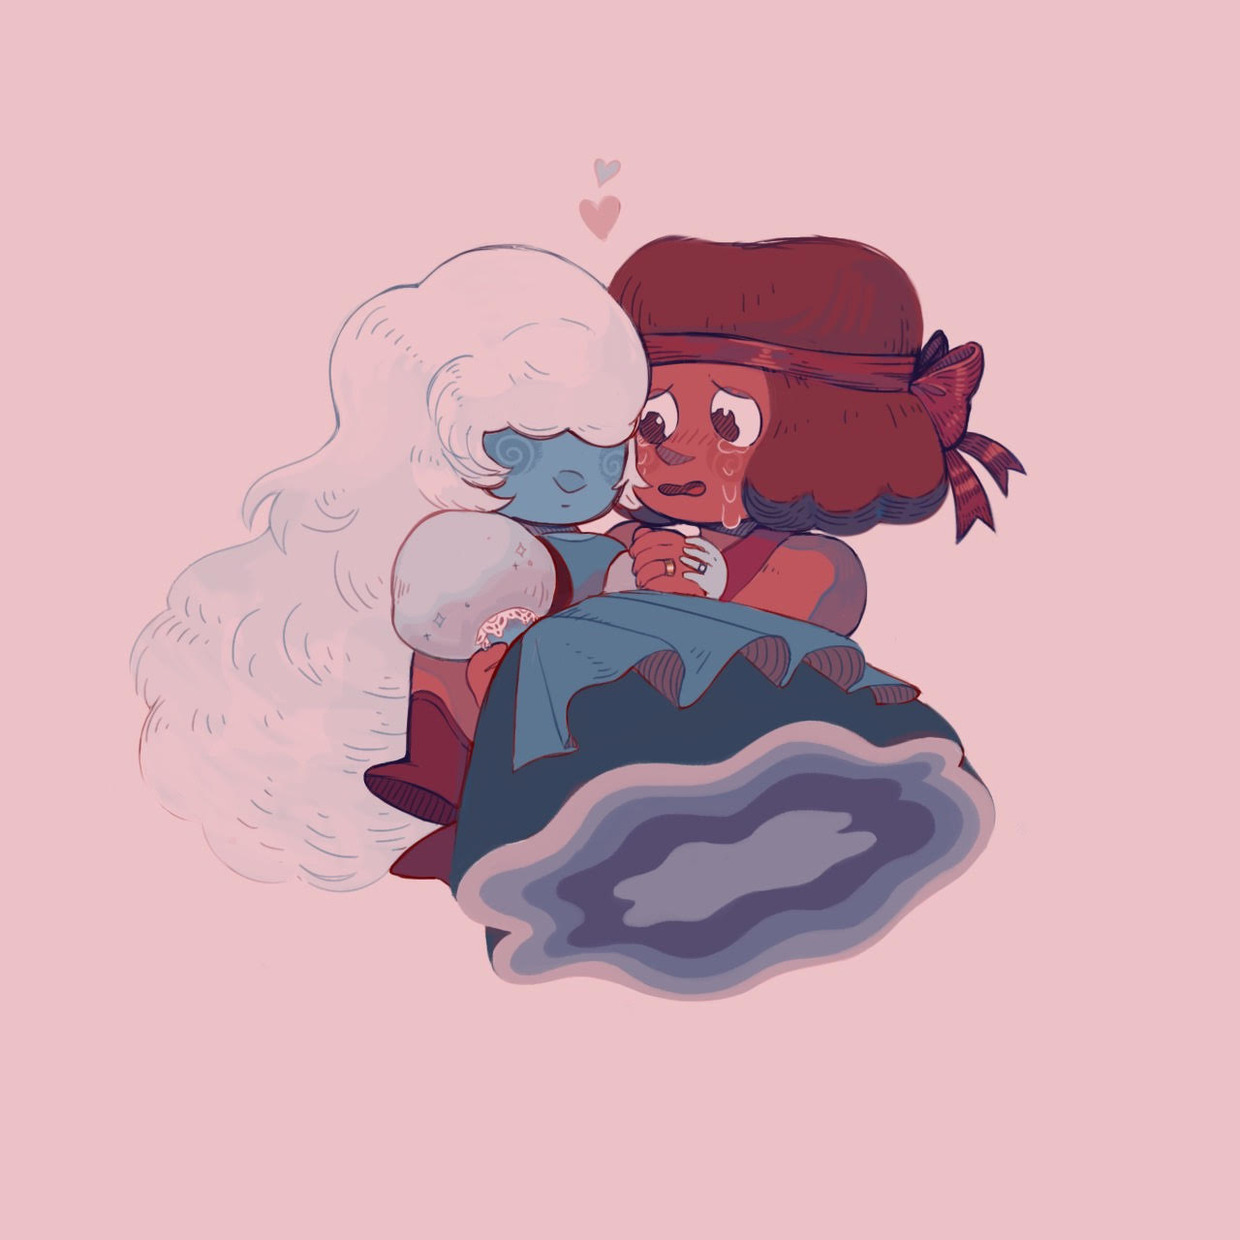 ever think about how ruby and sapphire literally proposed and got married and kissed on screen and now they’re canon wives